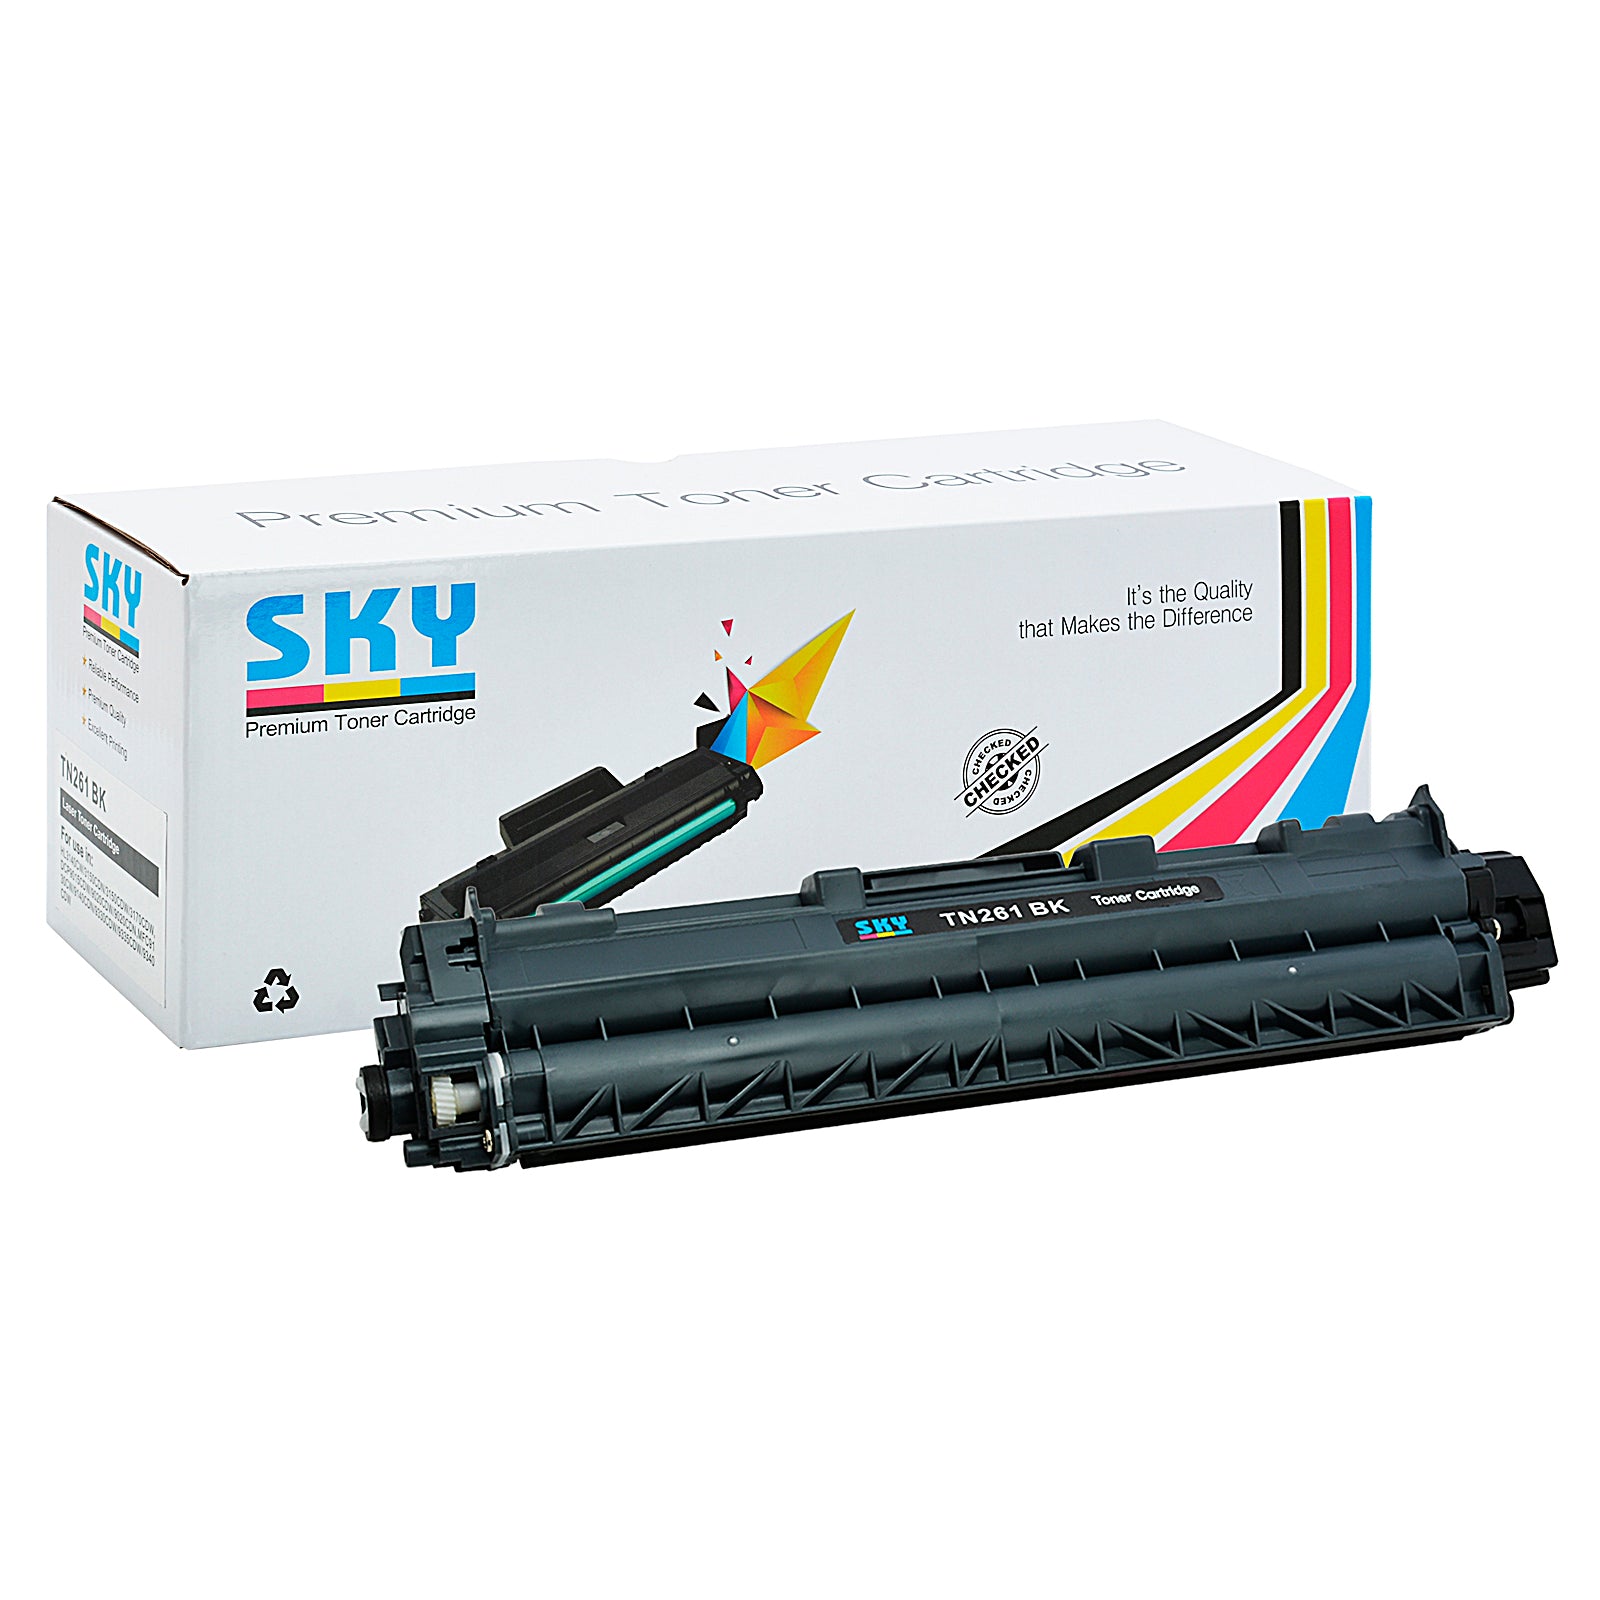 SKY TN-261 Compatible Toner Cartridge for Brother HL-3150 and MFC-9330CDW